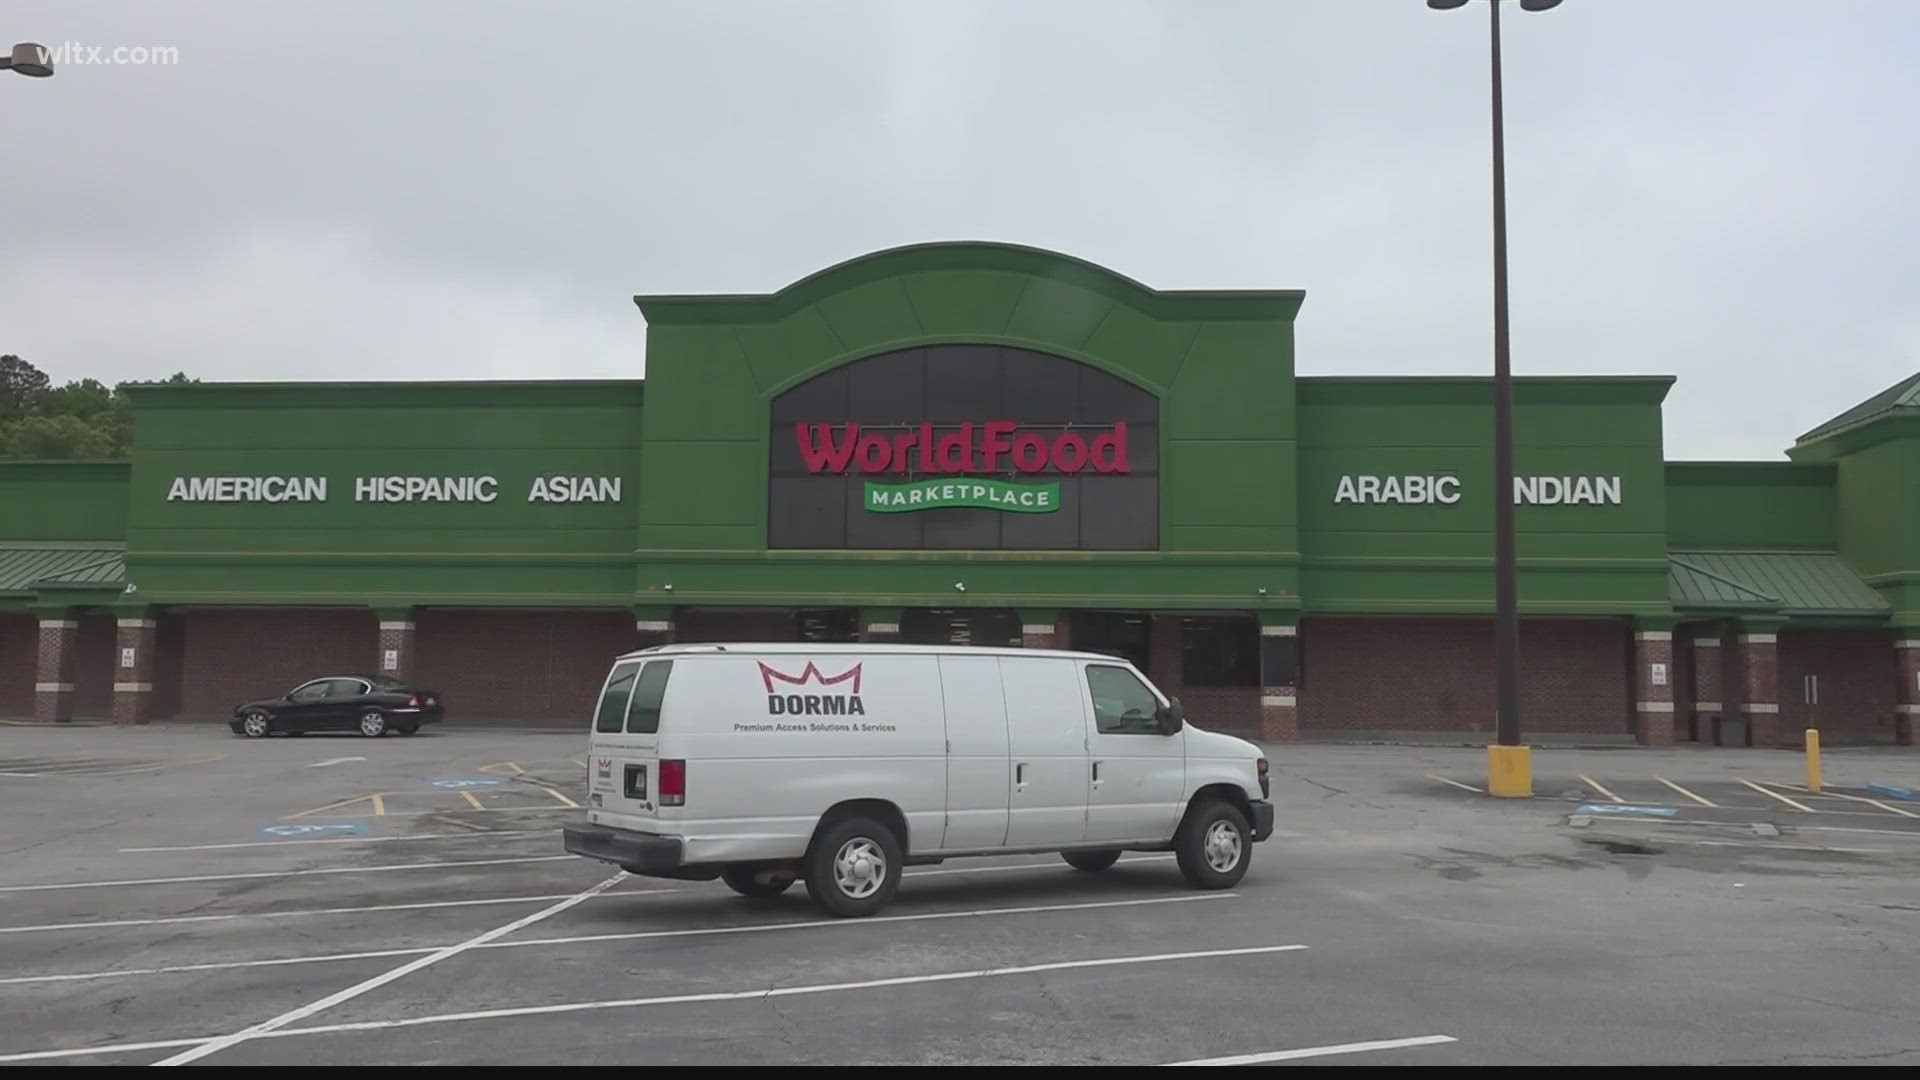 World Food Market will offer a variety of foods including Asian and Indian.